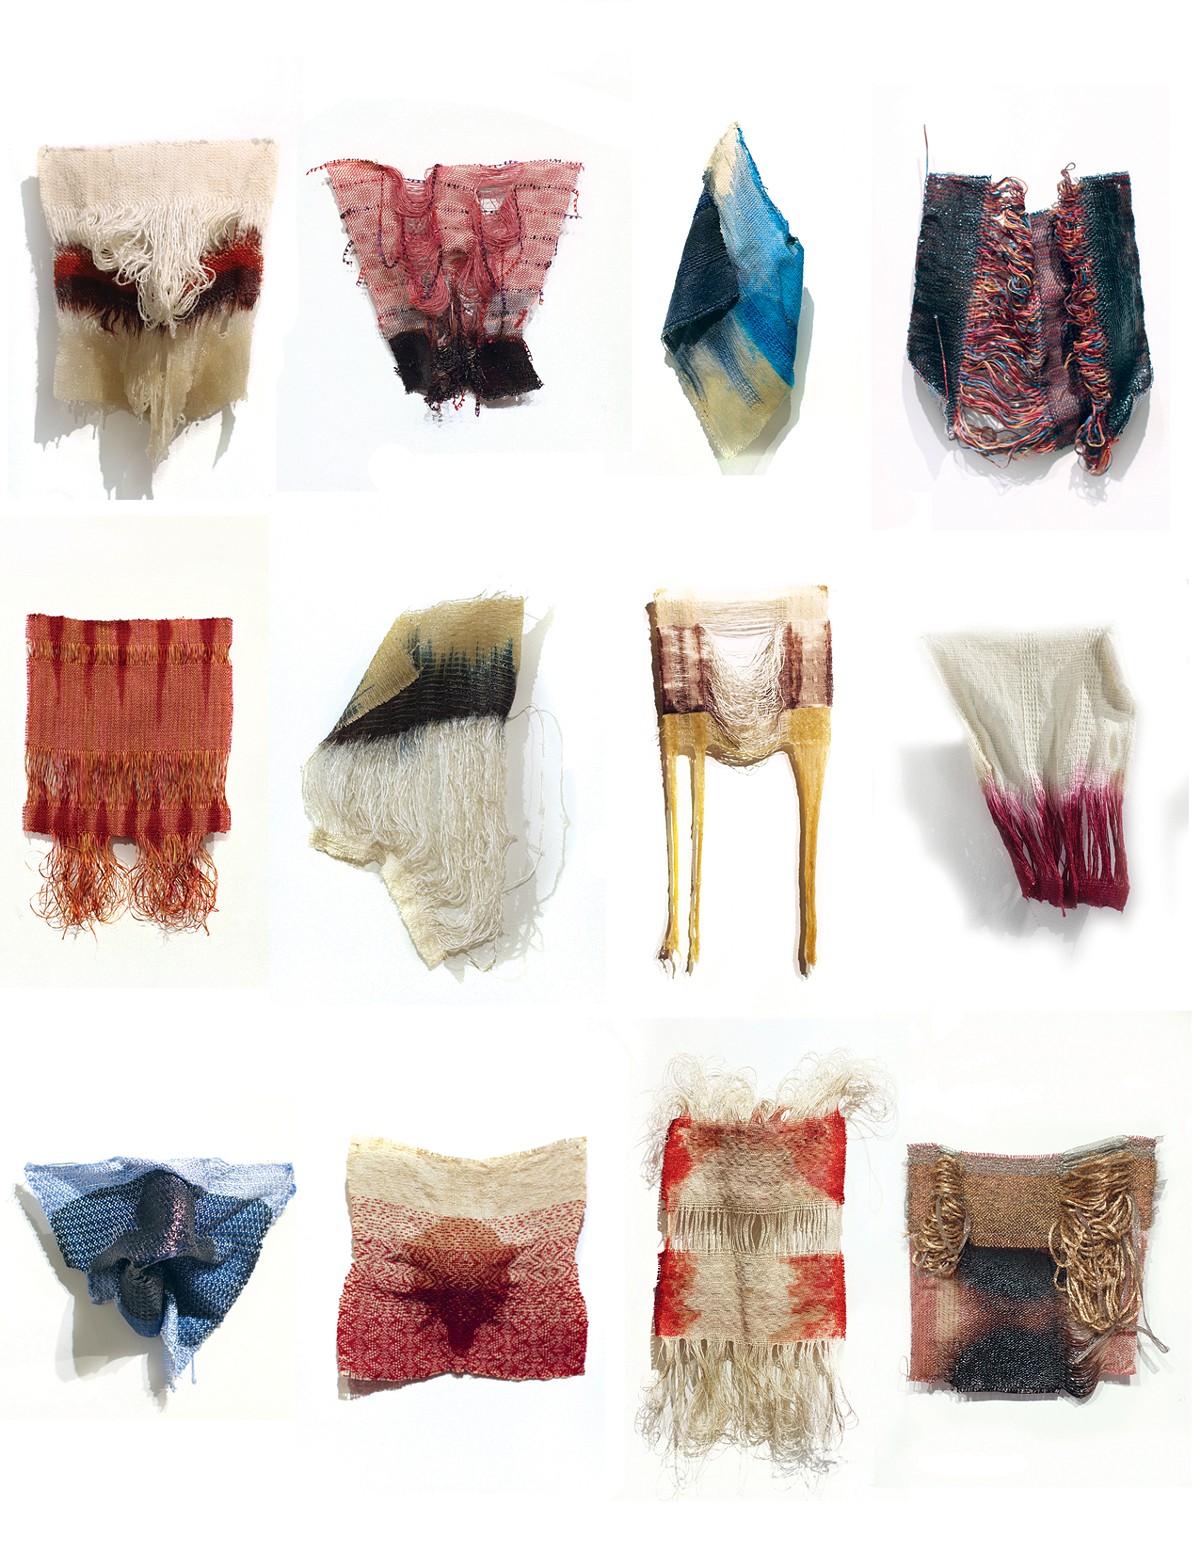 A small portion of Dissection, a new body of work by Jessica Pinsky.